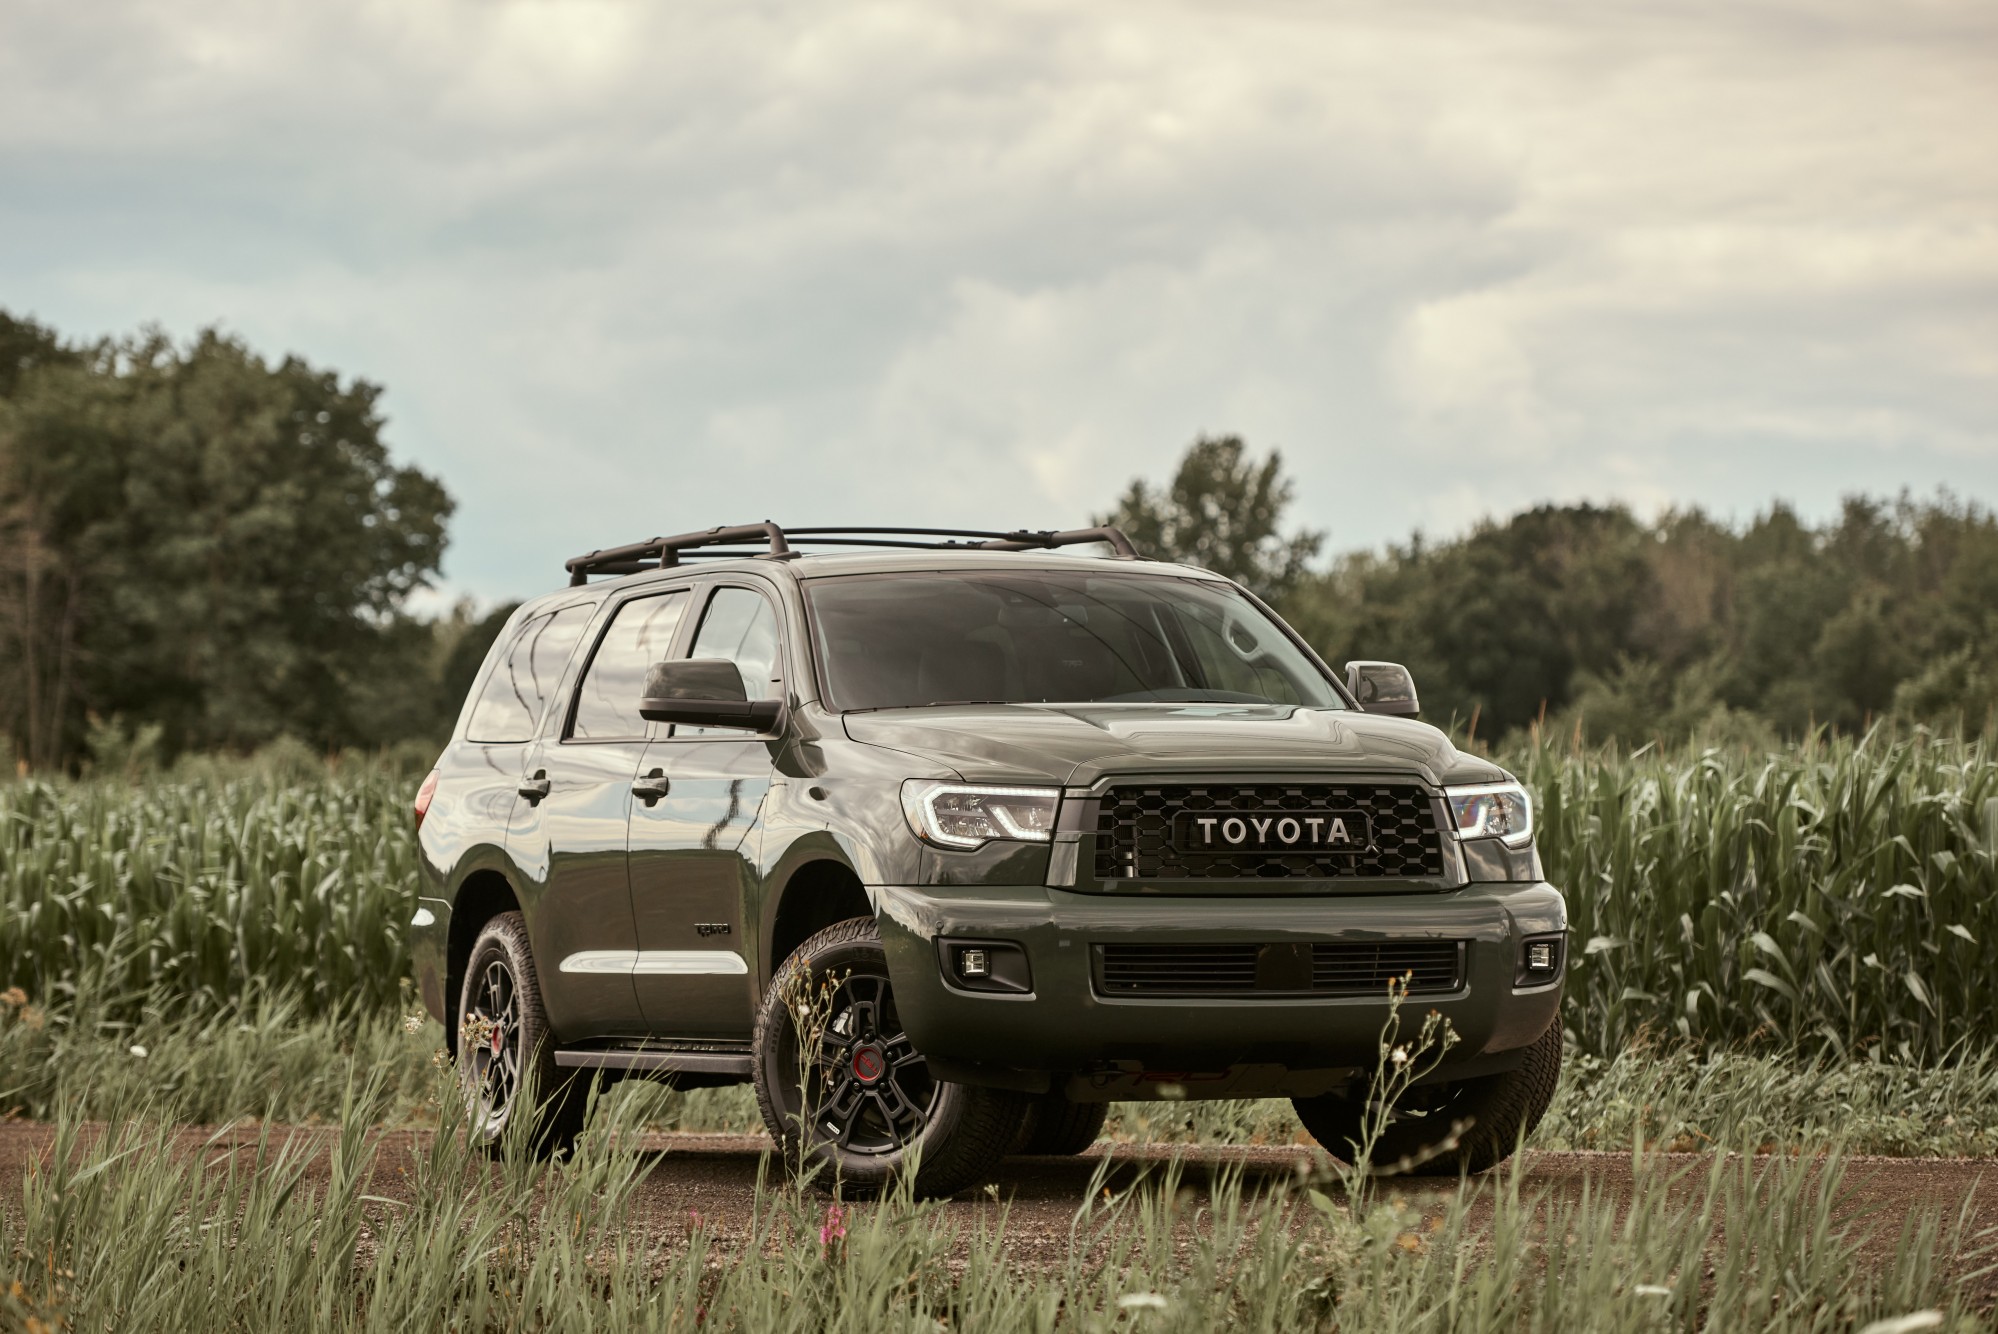 2020 Toyota Sequoia TRD Pro Is As Old As Its Name Suggests